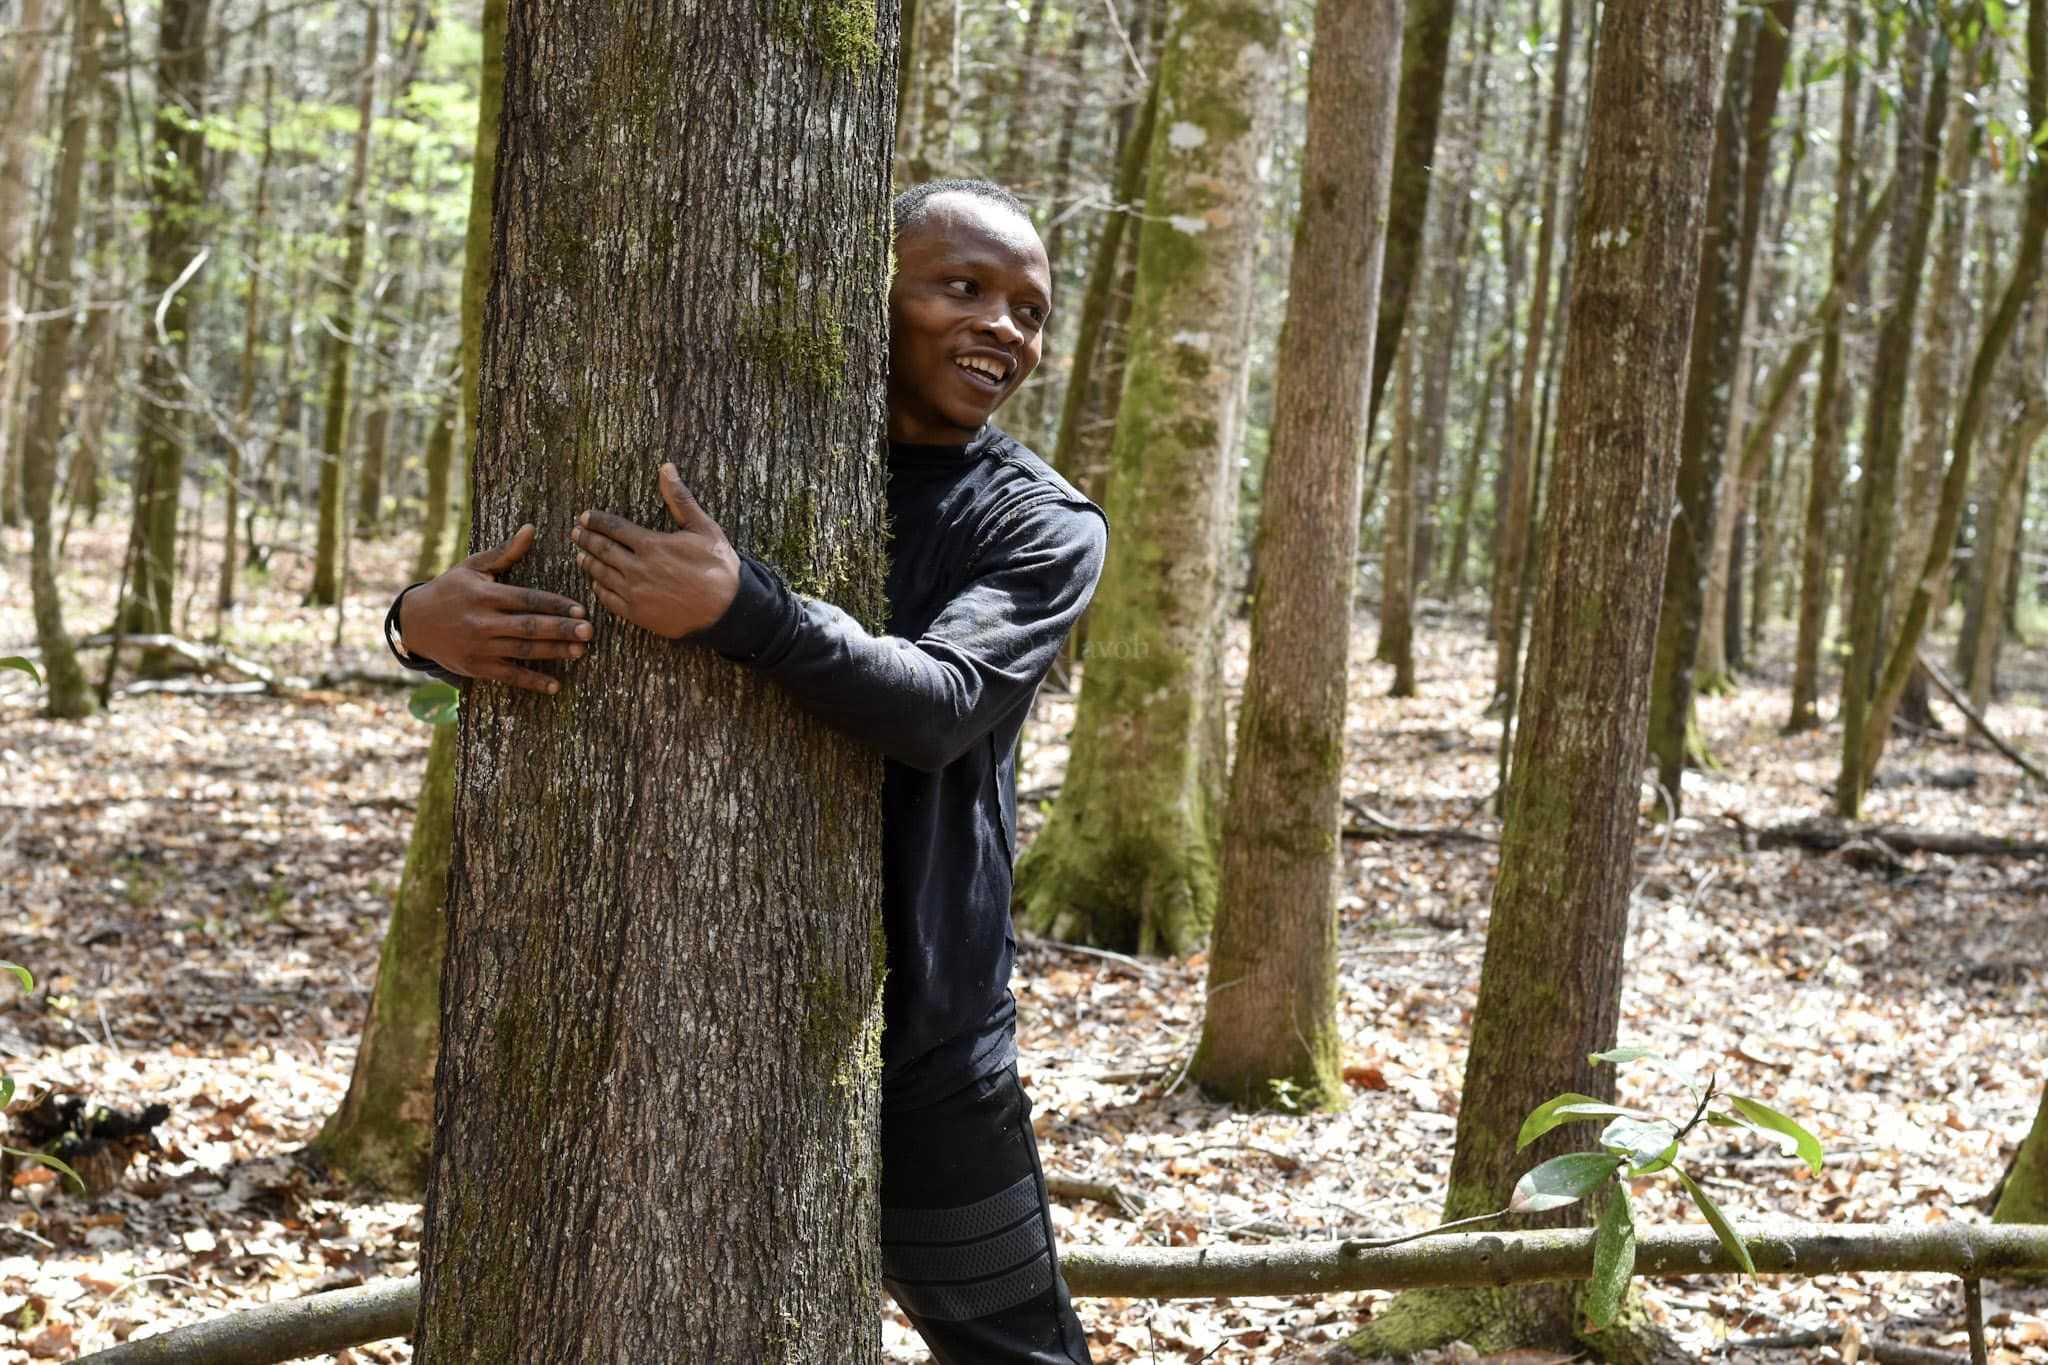 Ghanaian student sets World Record for ‘Most Trees Hugged’ [Video]